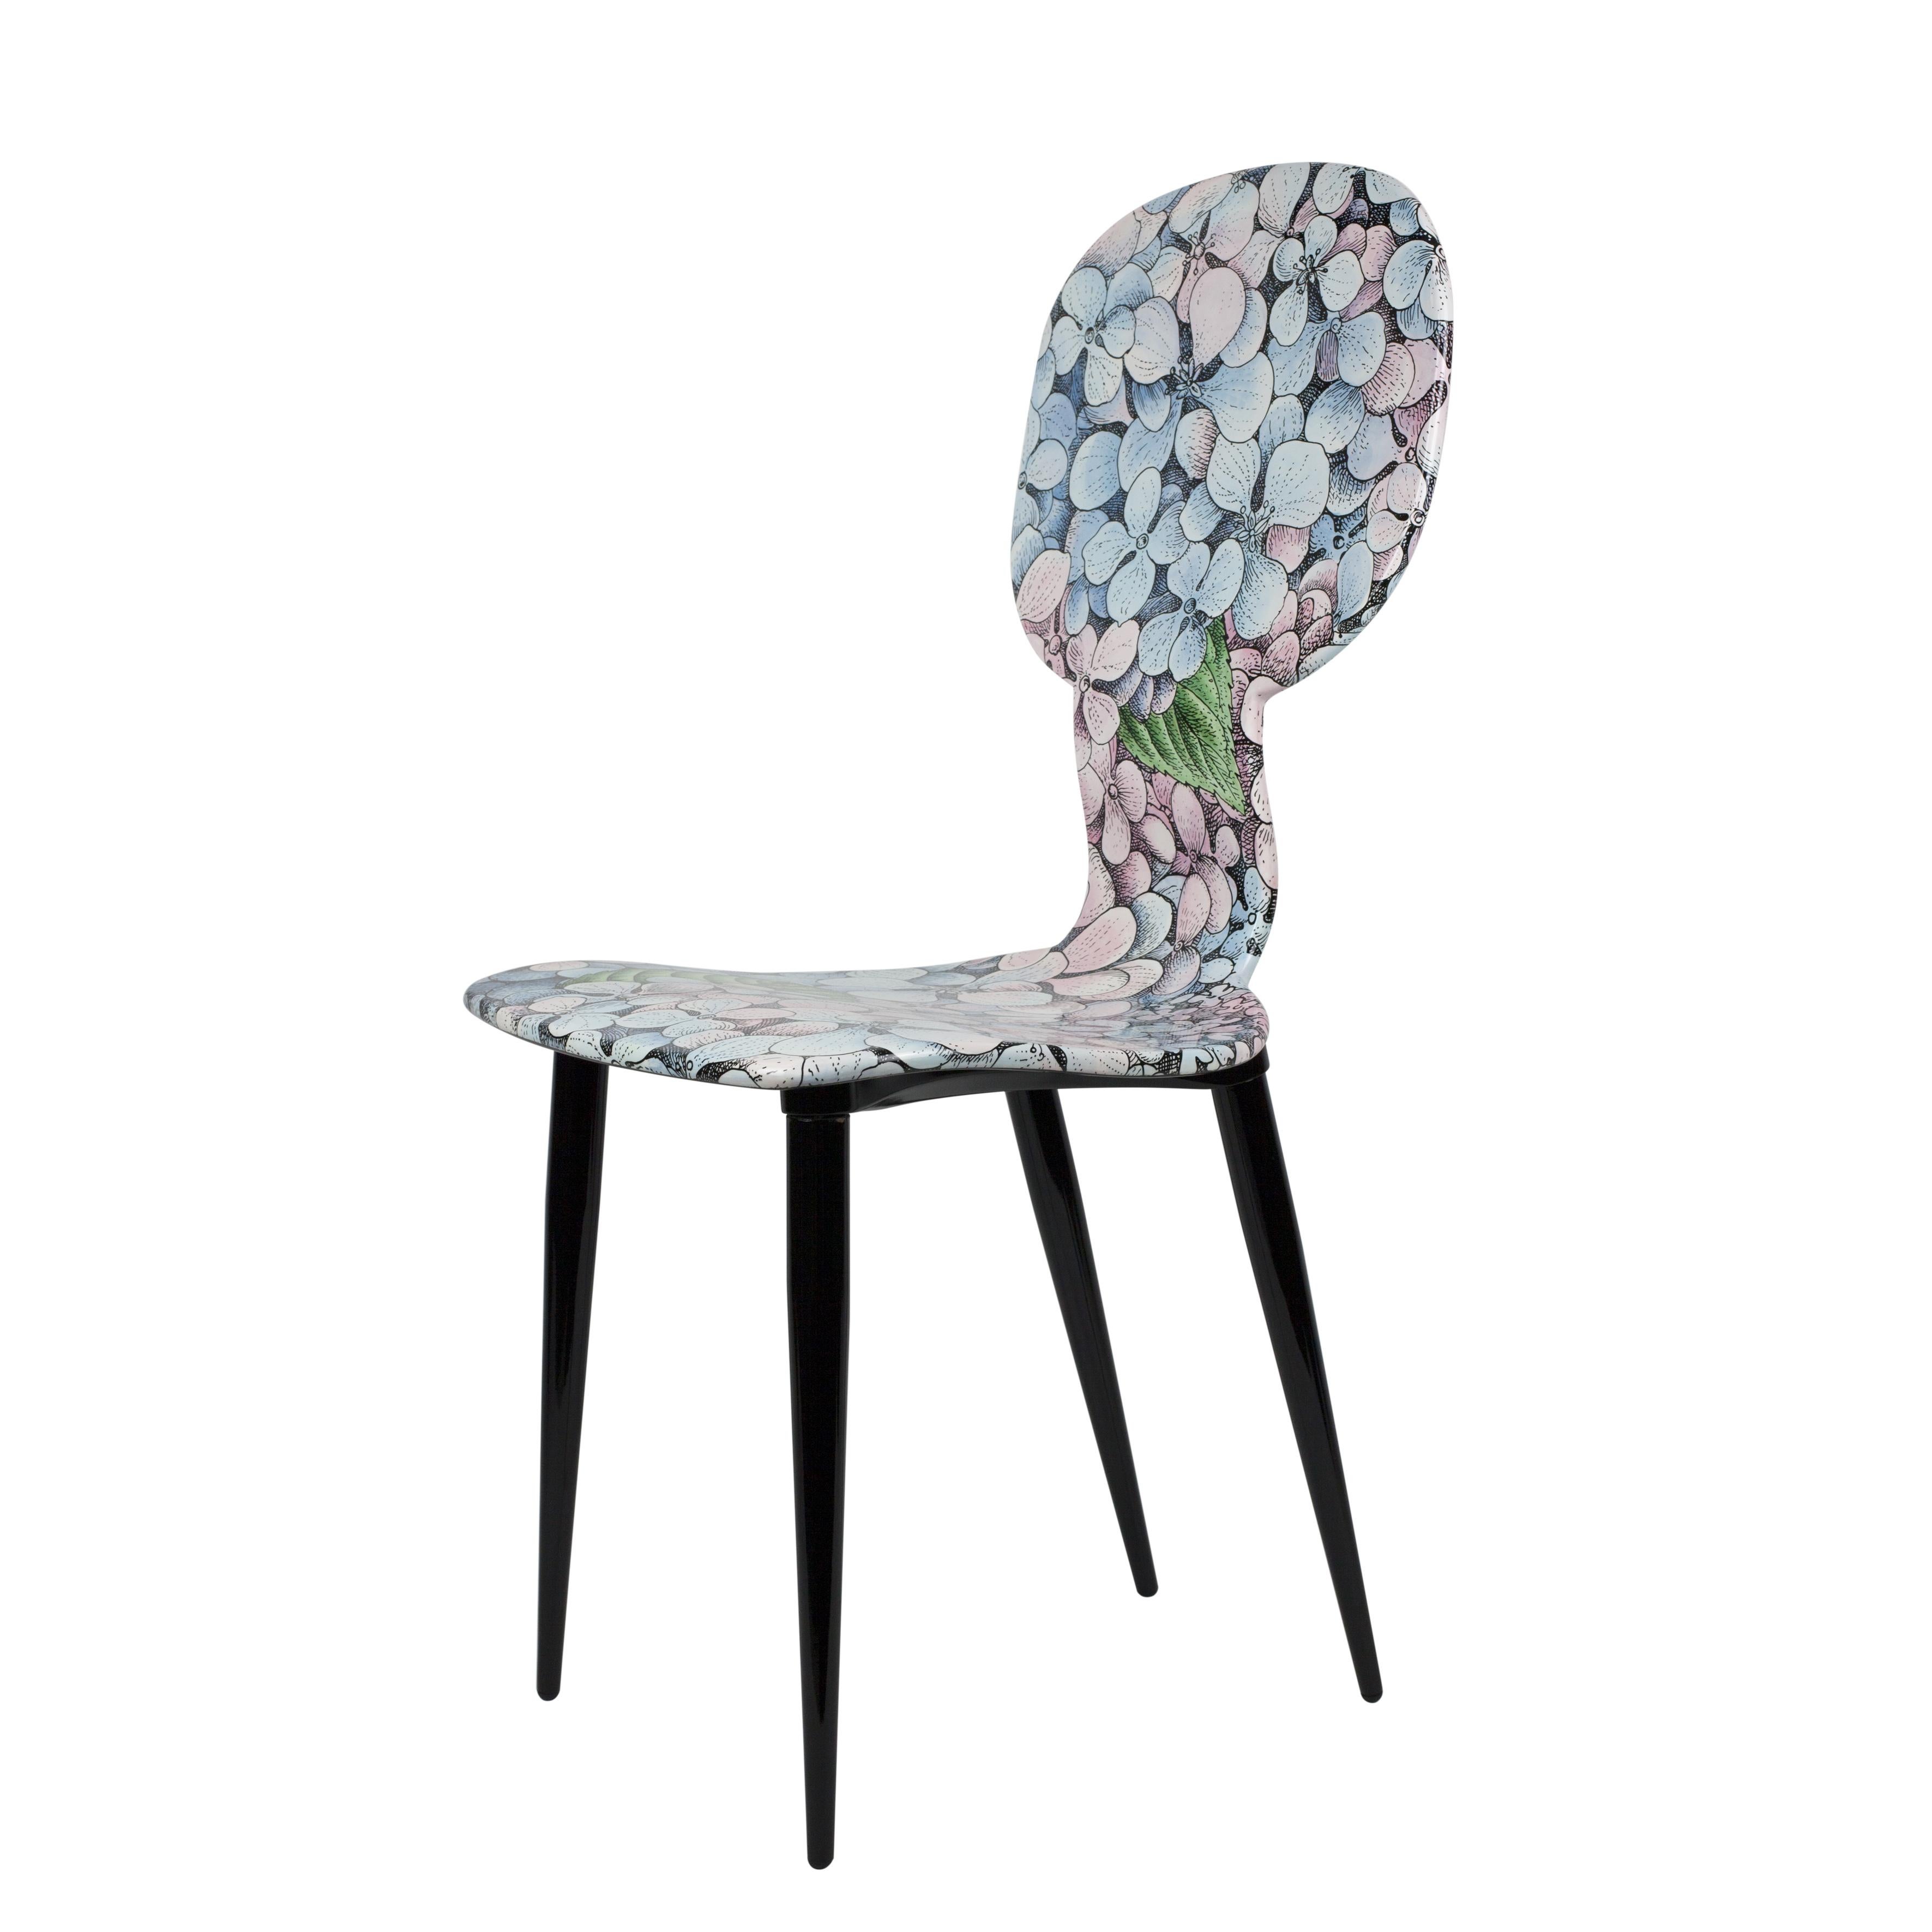 Fornasetti's take on the most classical piece of design, the chair, is a groundbreaking achievement in imagination. 

The Fornasetti chairs and stools are going to be the most surprising detail of your house. 

This chair is handcrafted using